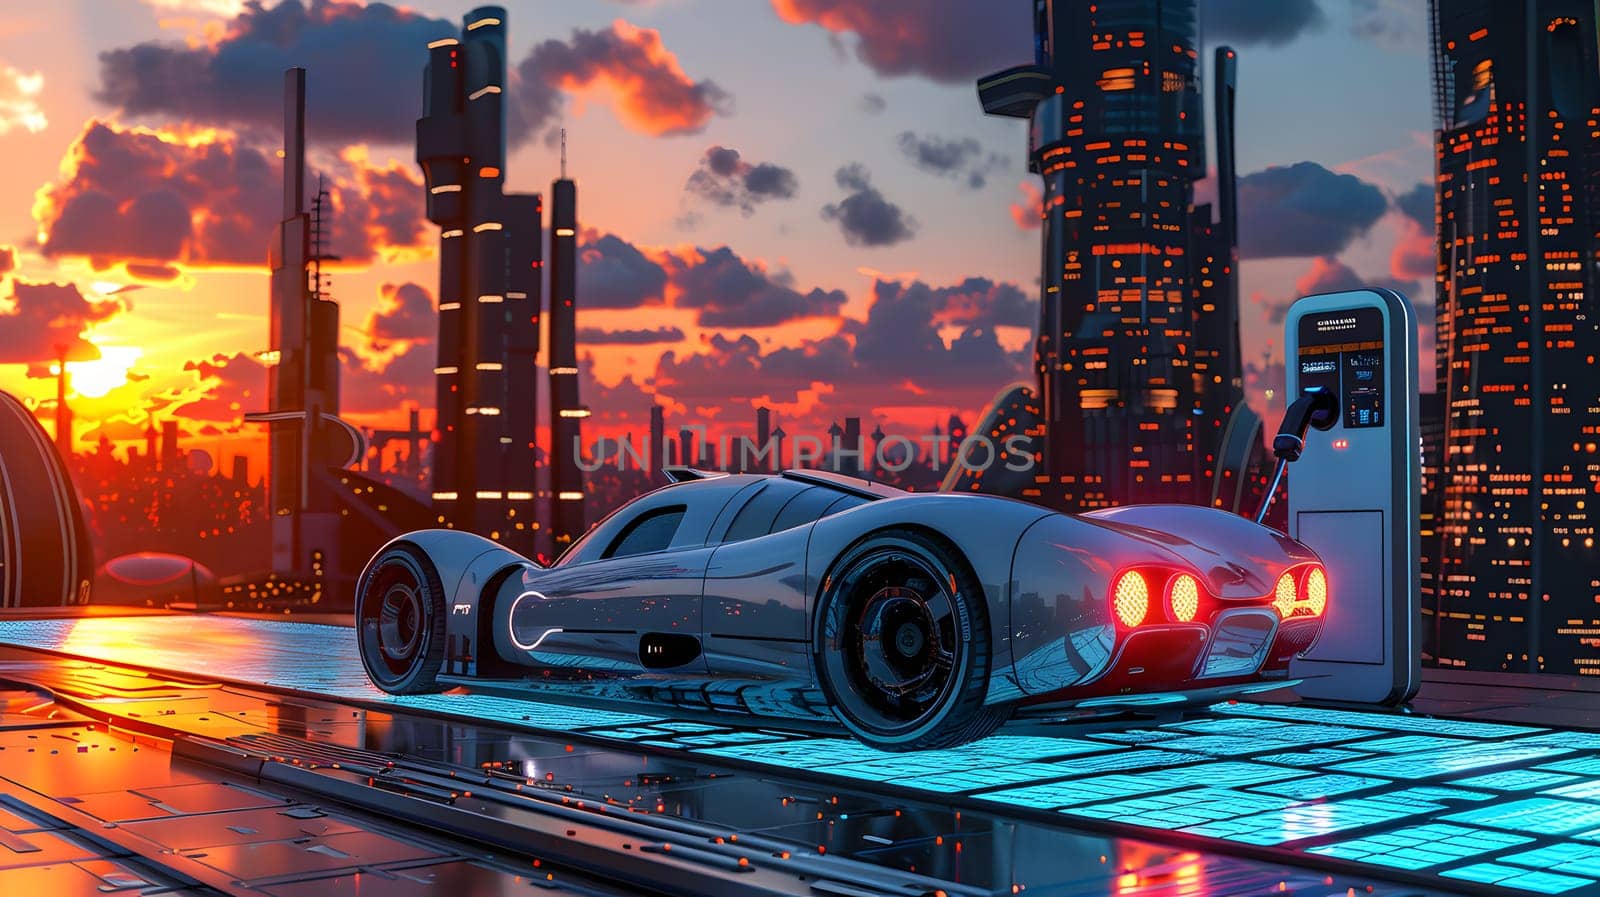 Futuristic vehicle with glowing automotive lighting drives through city at dusk by Nadtochiy